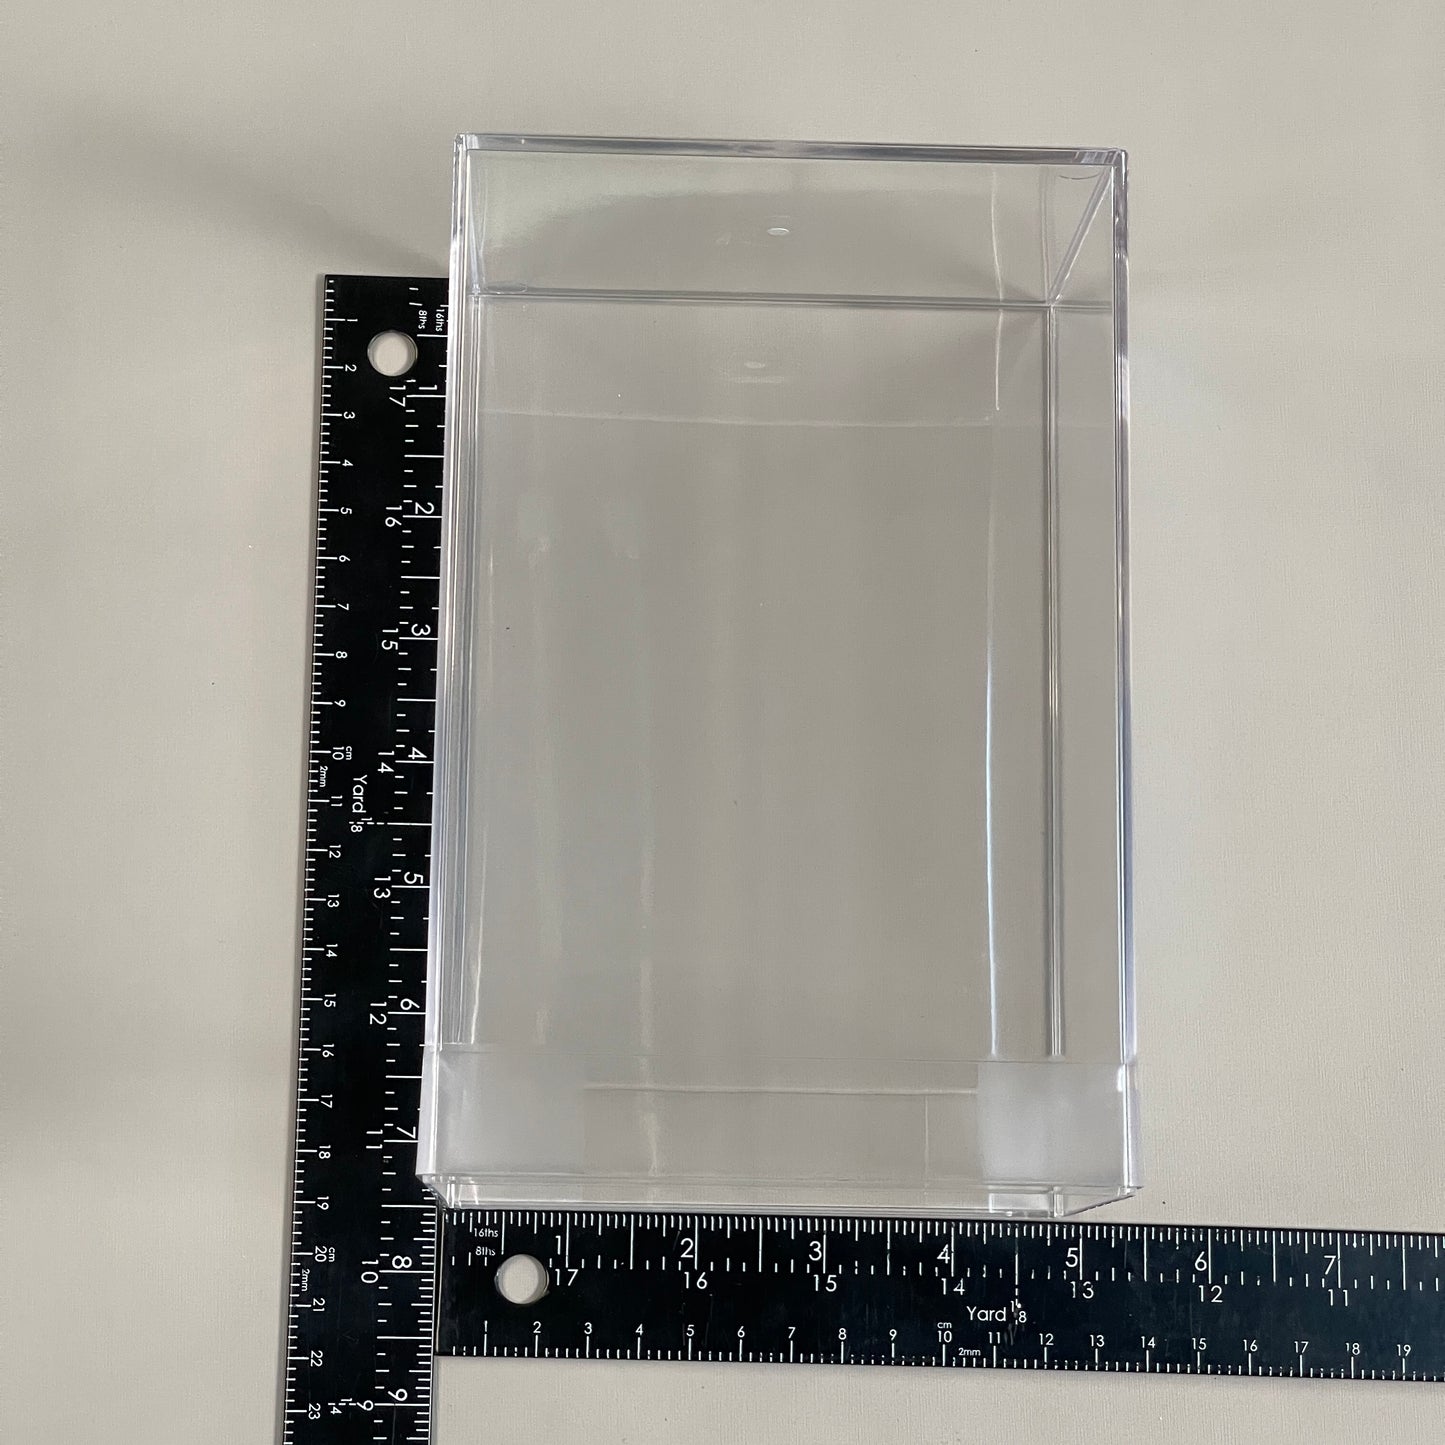 FUNKO POP Box Protector Thick Acrylic Display Case Cover (New)